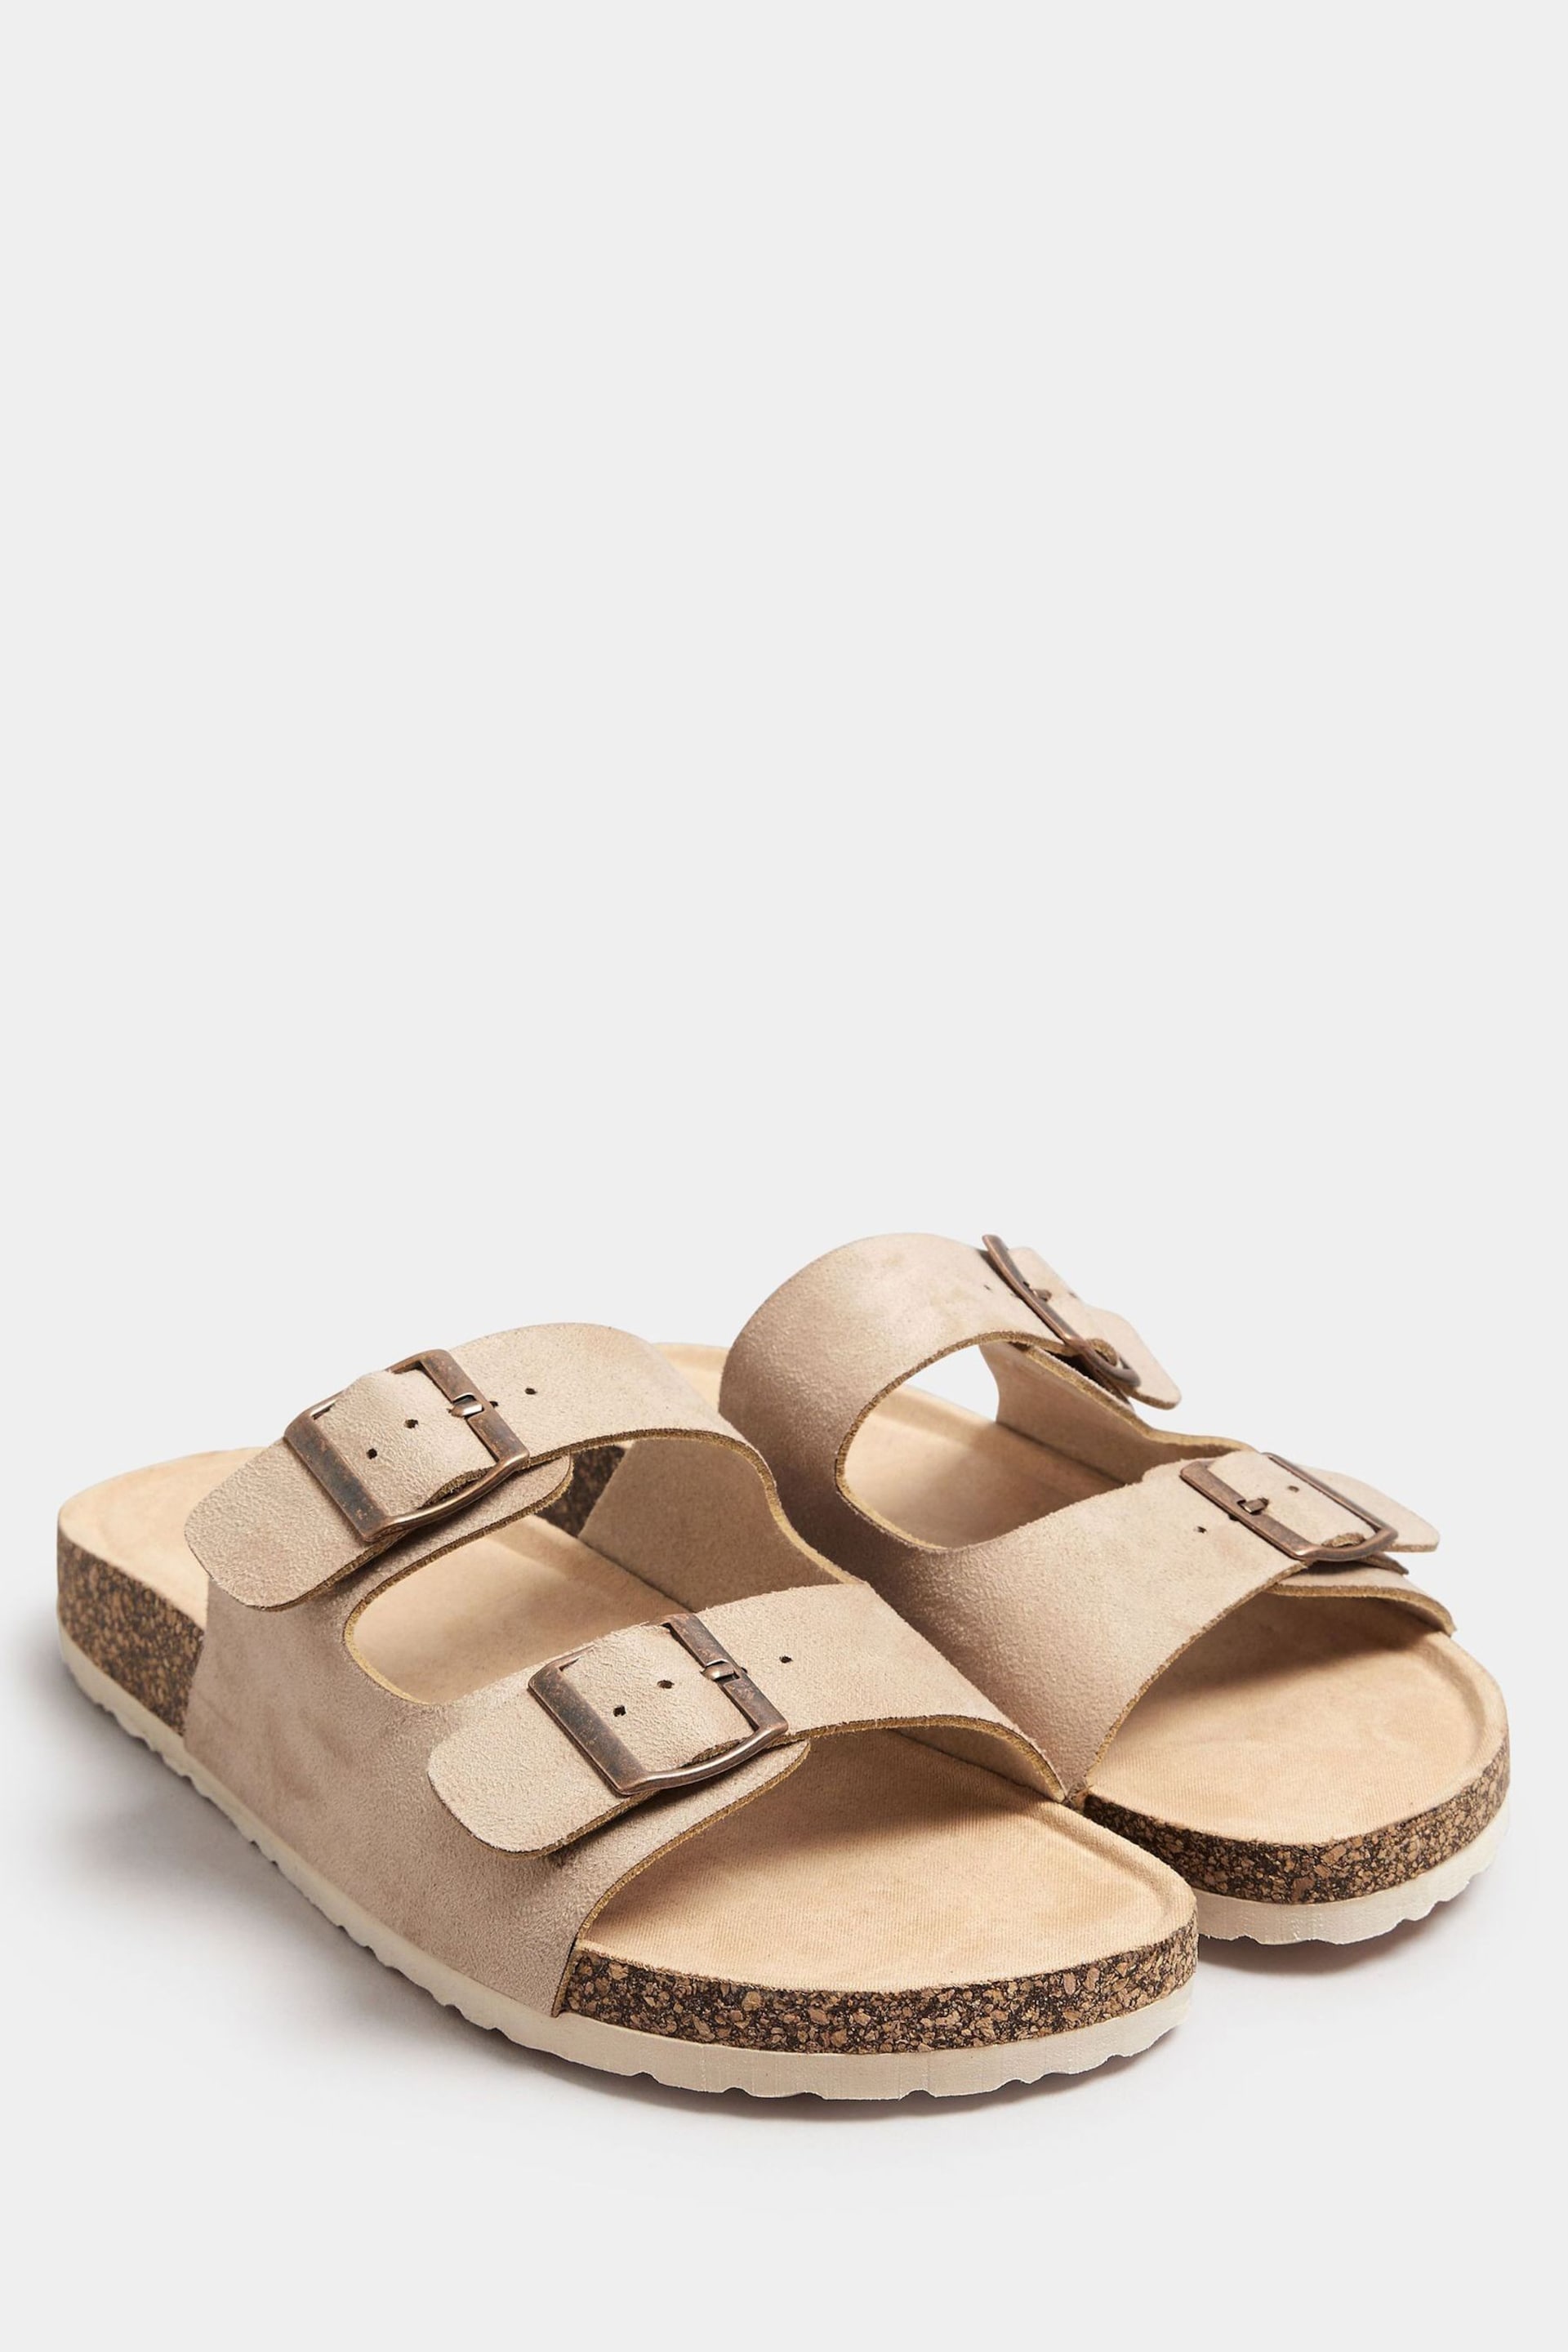 Yours Curve Natural Faux Suede Buckle Strap Footbed Sandals In Extra Wide EEE Fit - Image 3 of 6